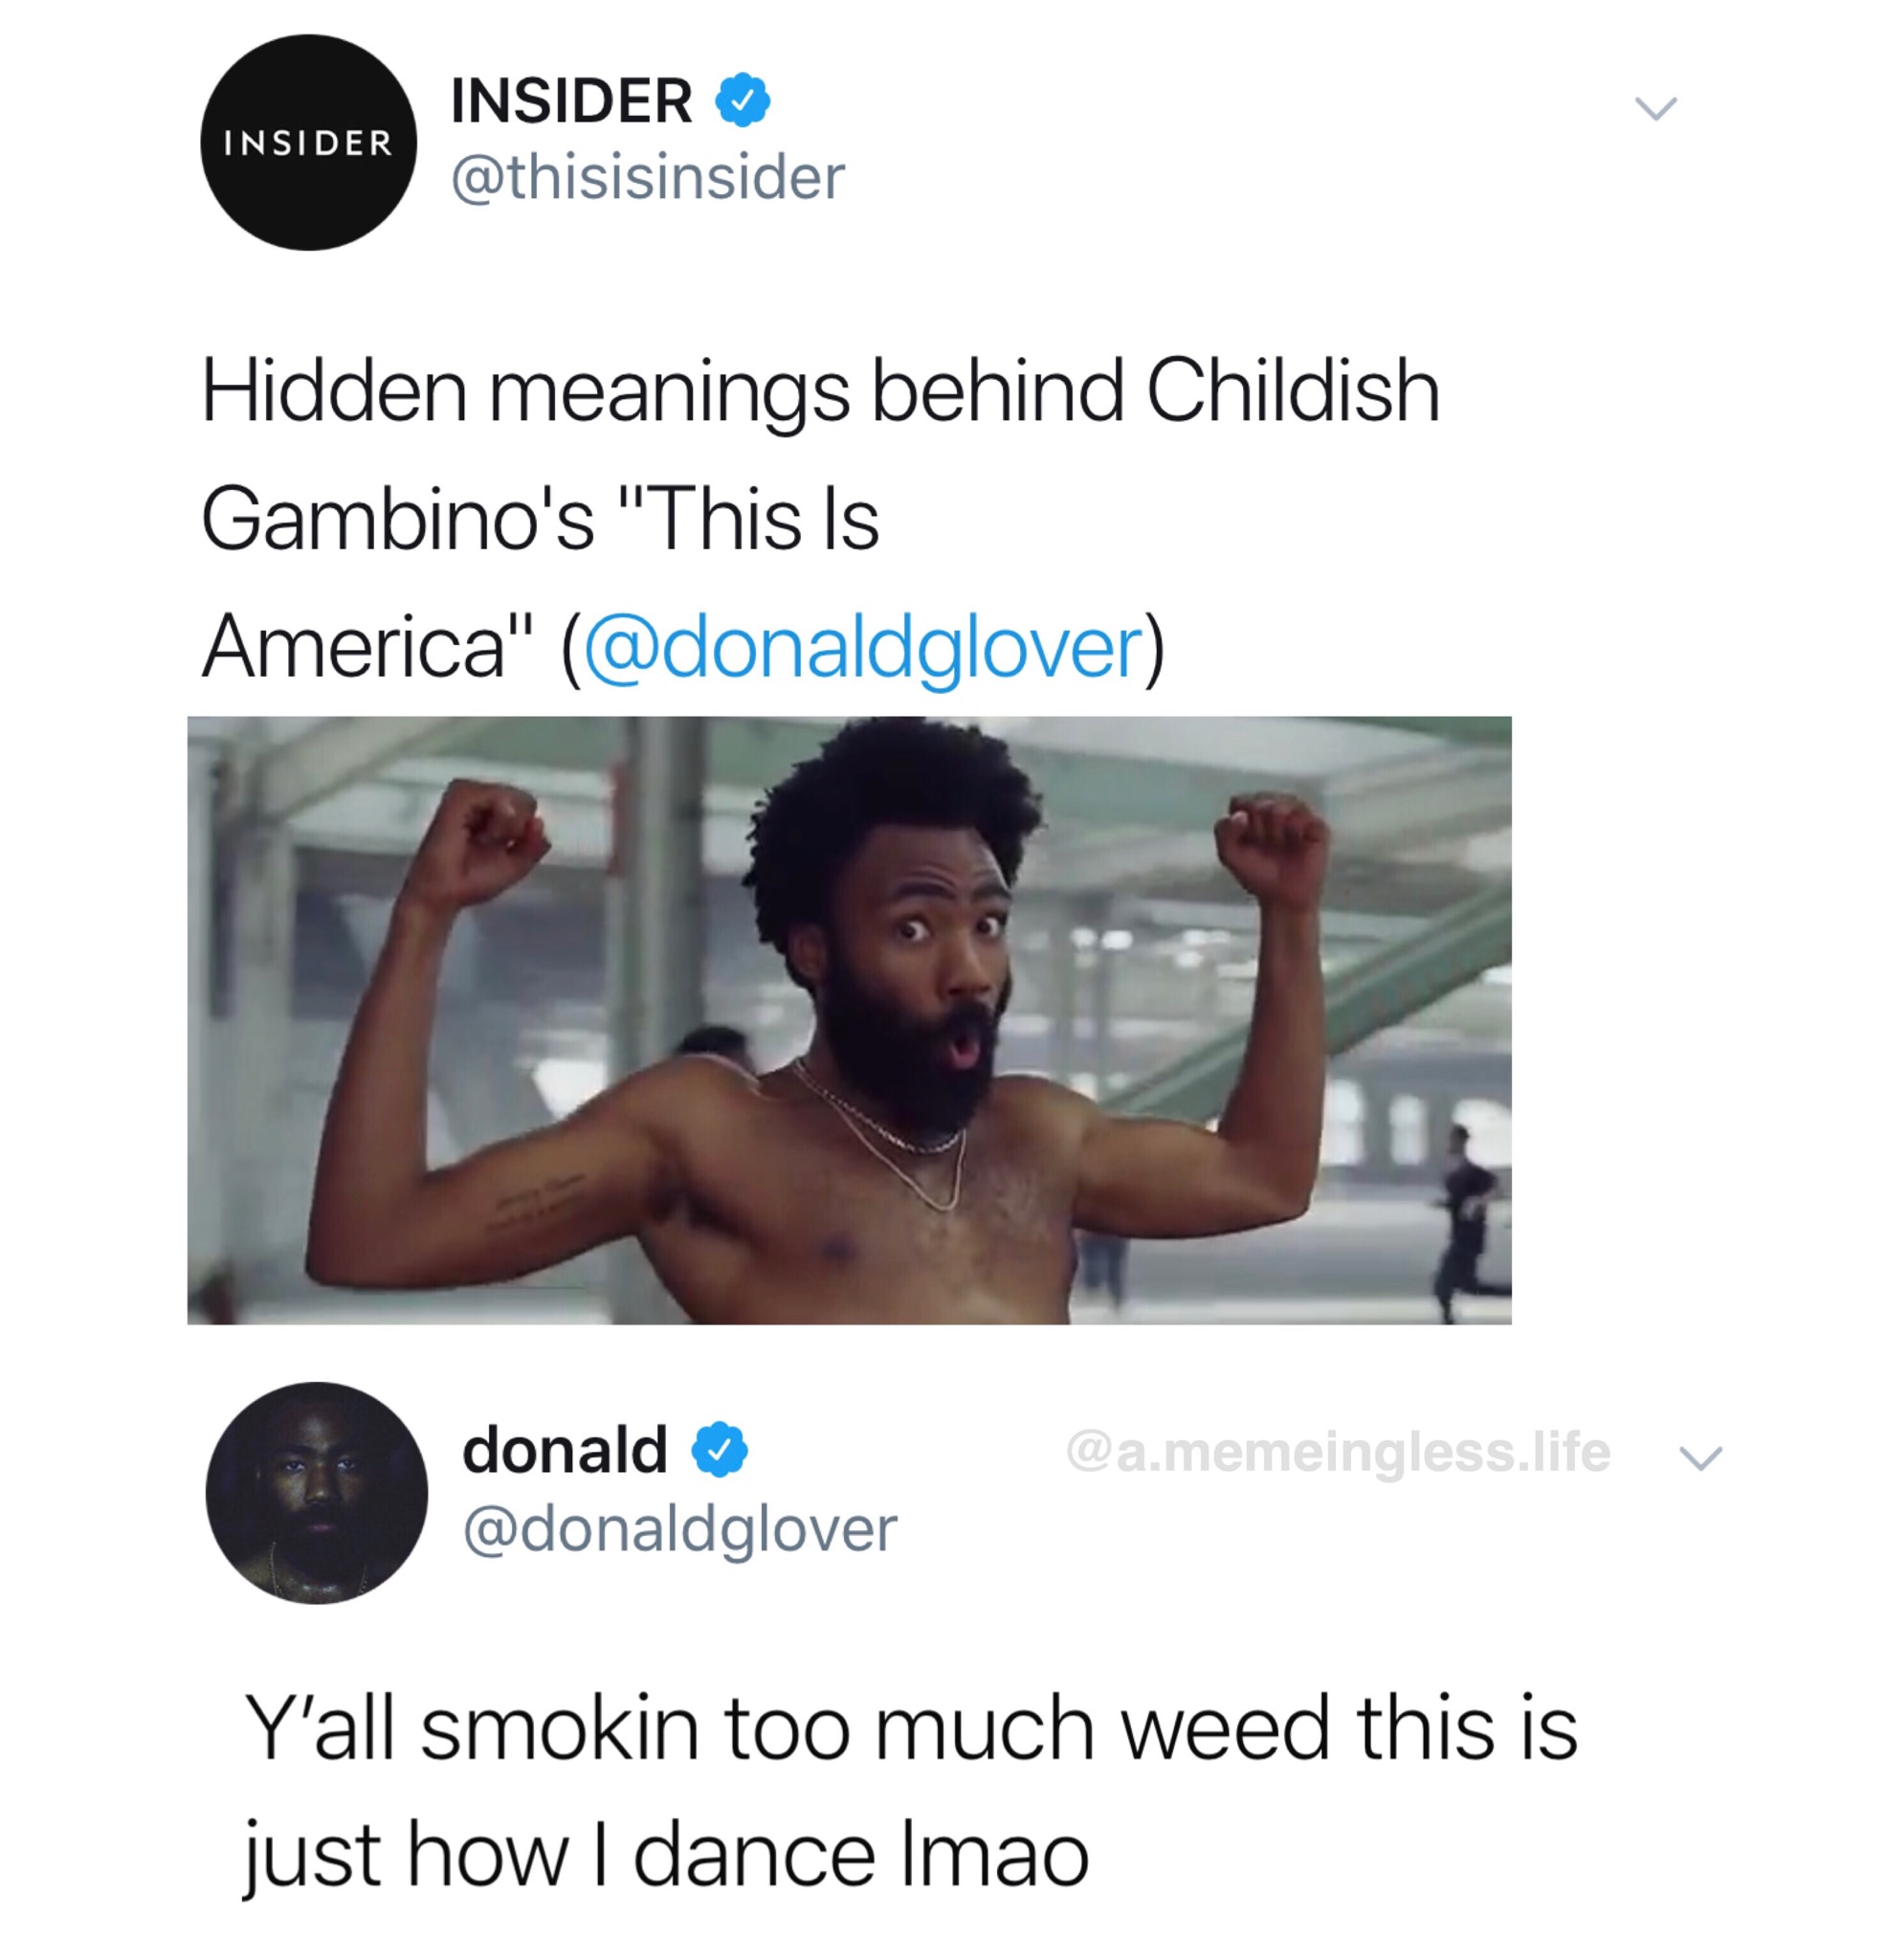 memes - childish gambino this is america memes - Insider Insider Hidden meanings behind Childish Gambino's "This Is America" .memeingless.life v donald Y'all smokin too much weed this is just how I dance Imao